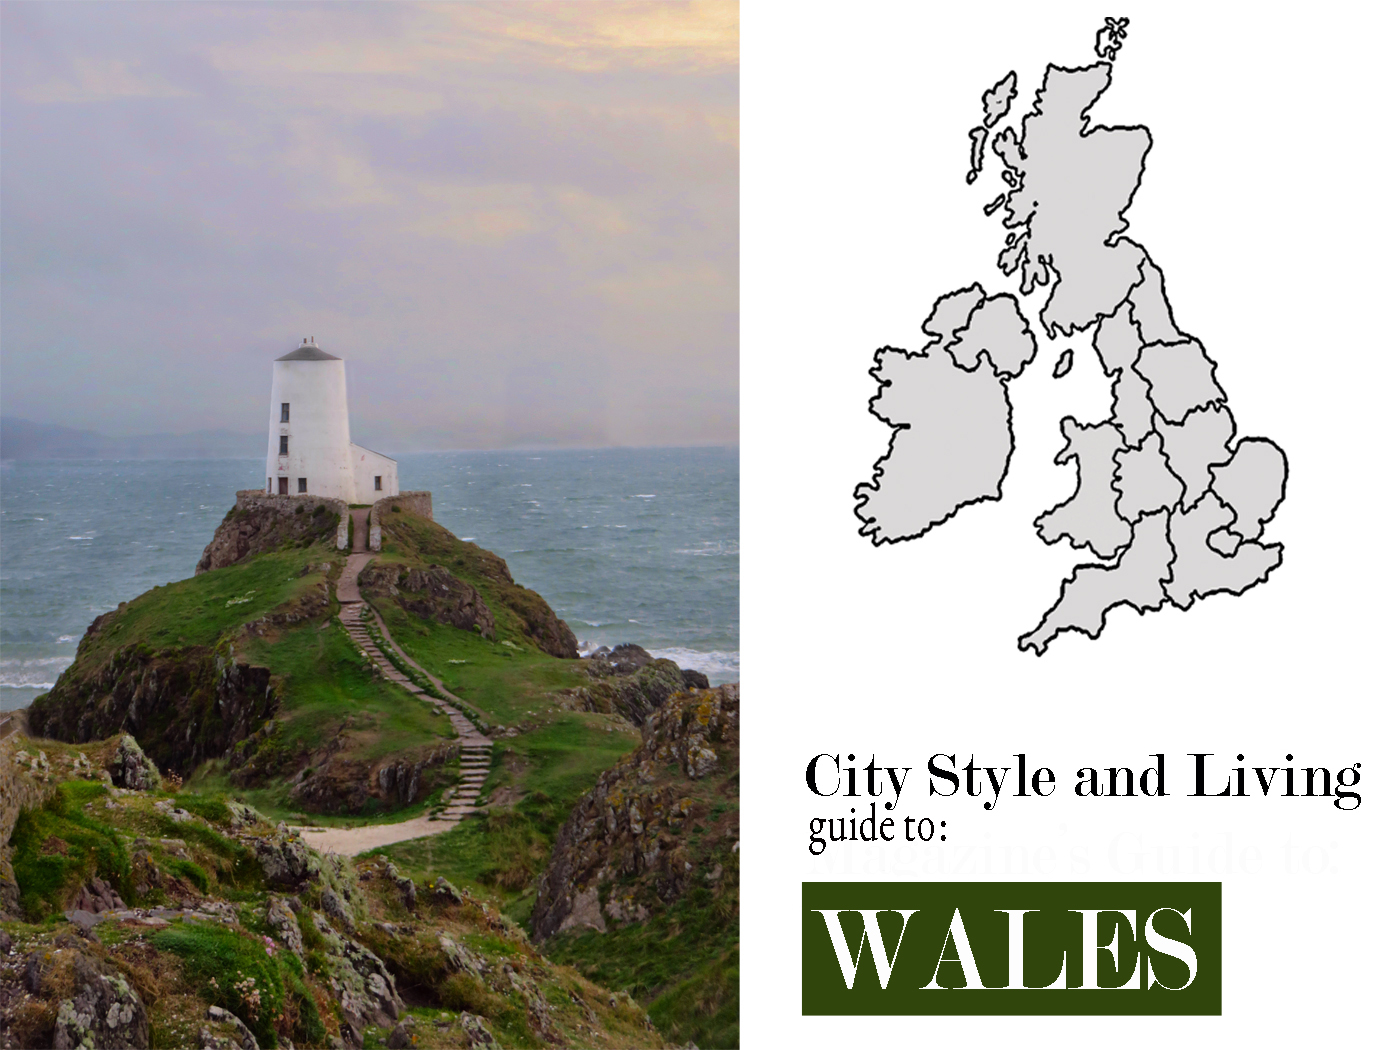 City Style and Living Magazine Winter 2018 Travel Guide To Wales